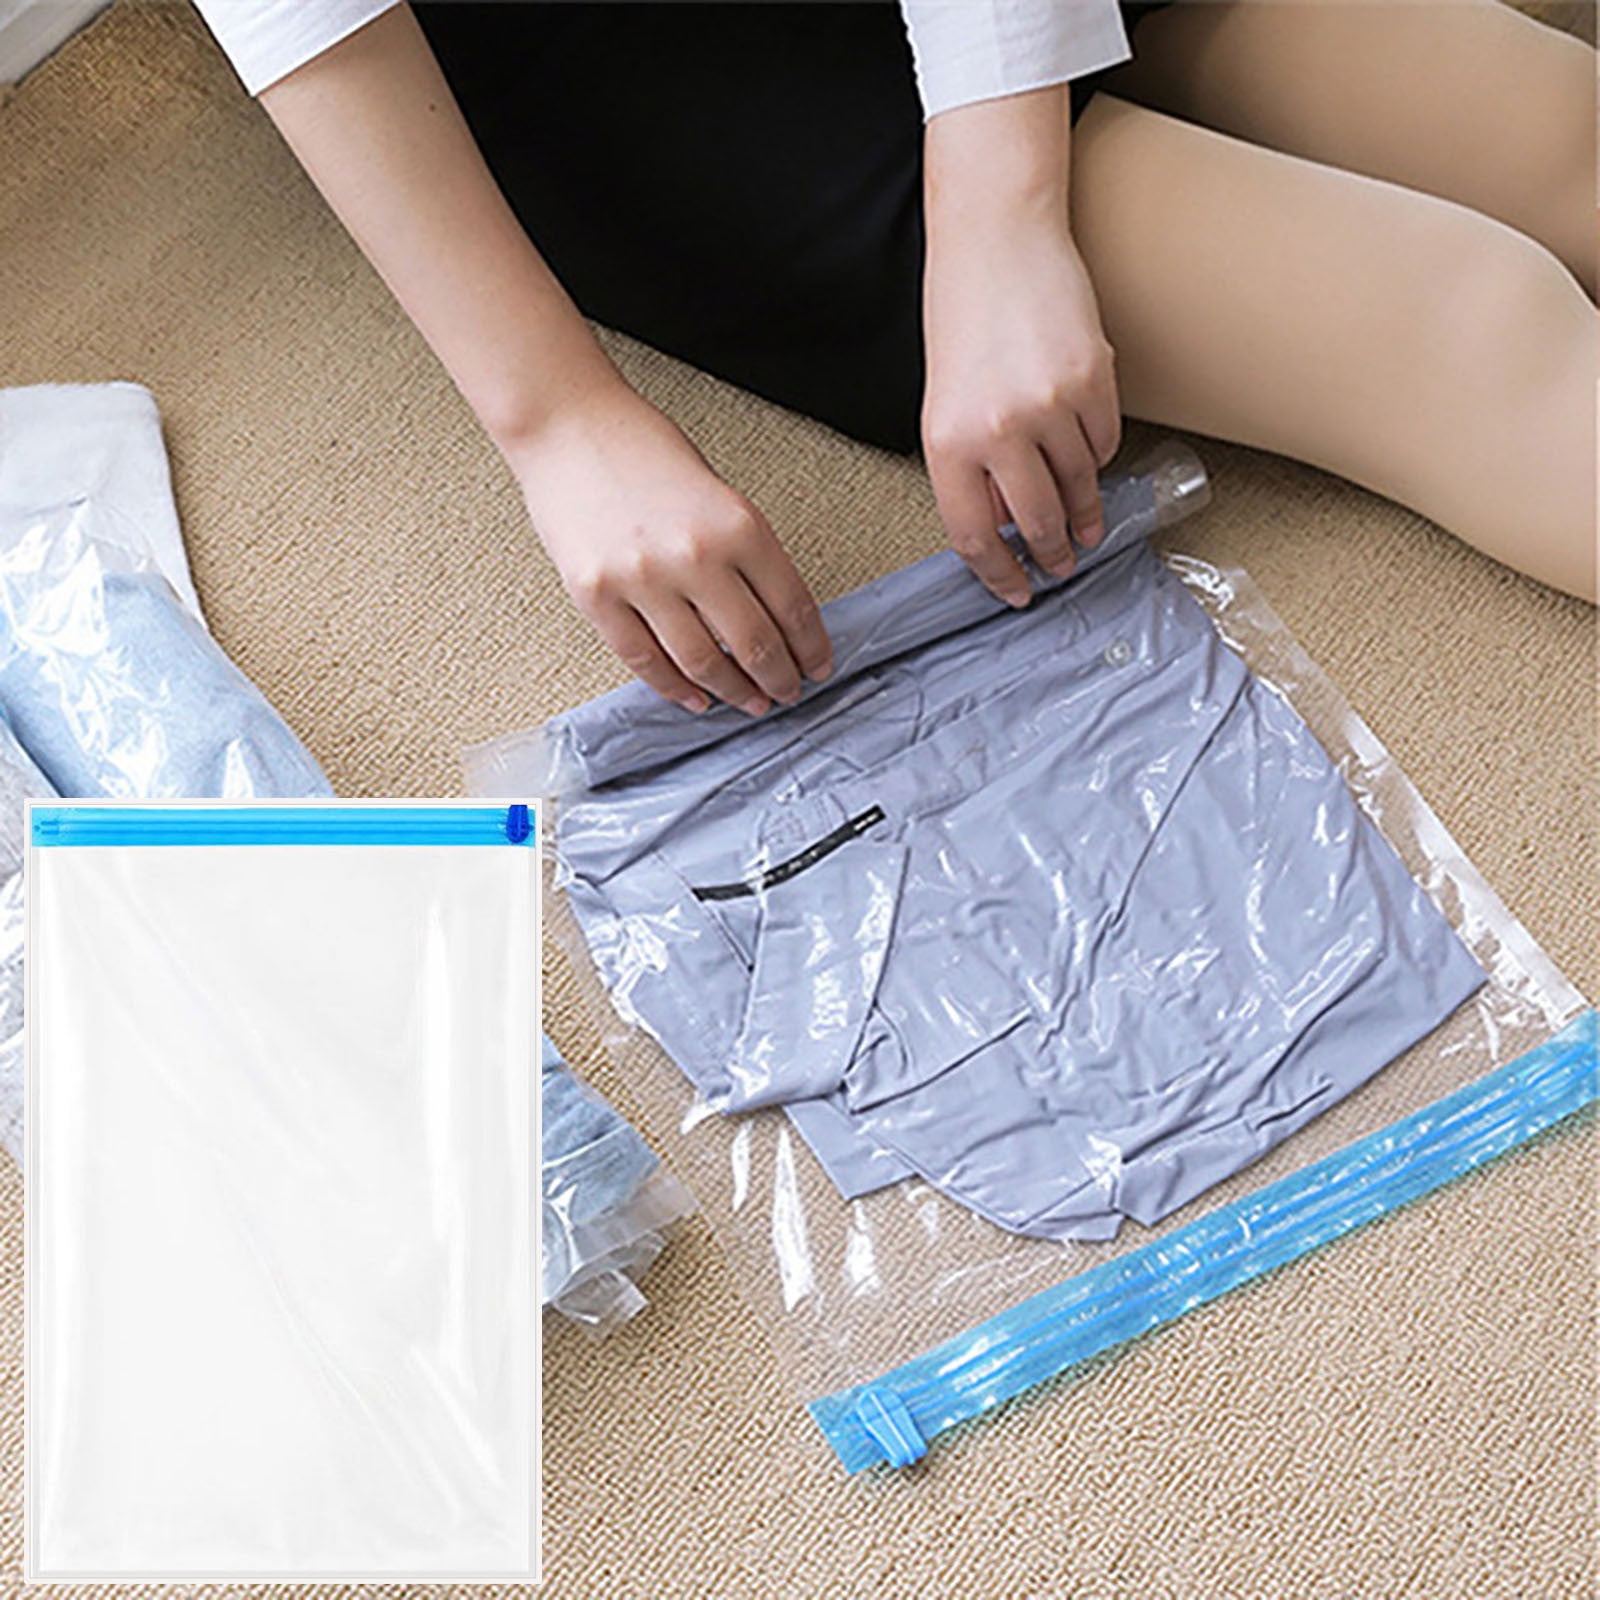  Relime Vacuum Bags for Travel, Revolutionary Reusable  Compression Bags for Travel Suitcases and Backpack, Space Saver Bags for  Travel - Carry on Set